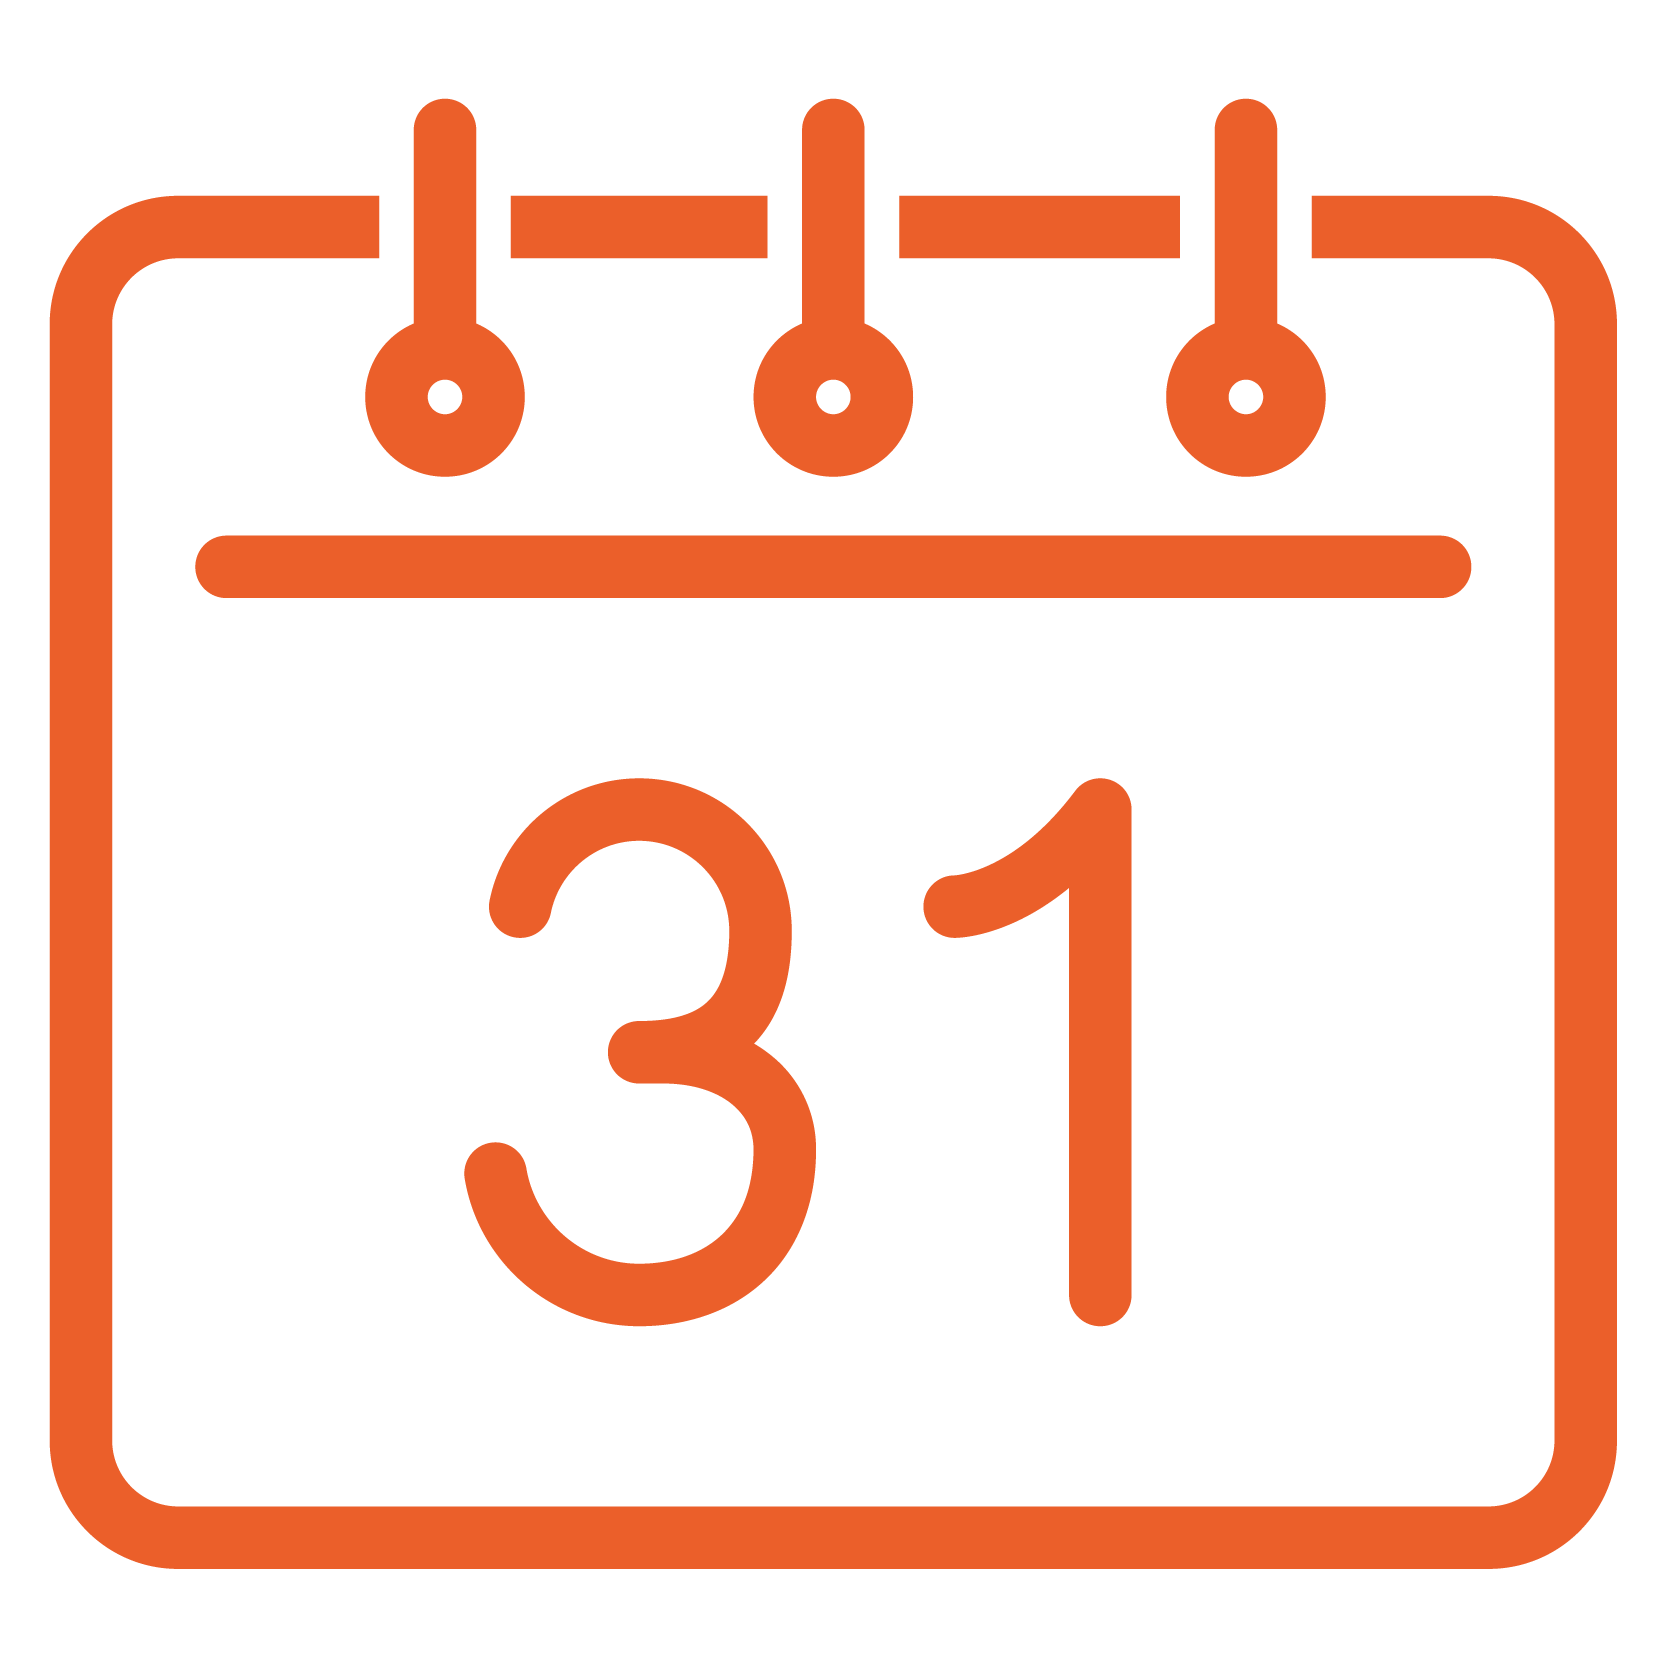 calendar page icon showing 31